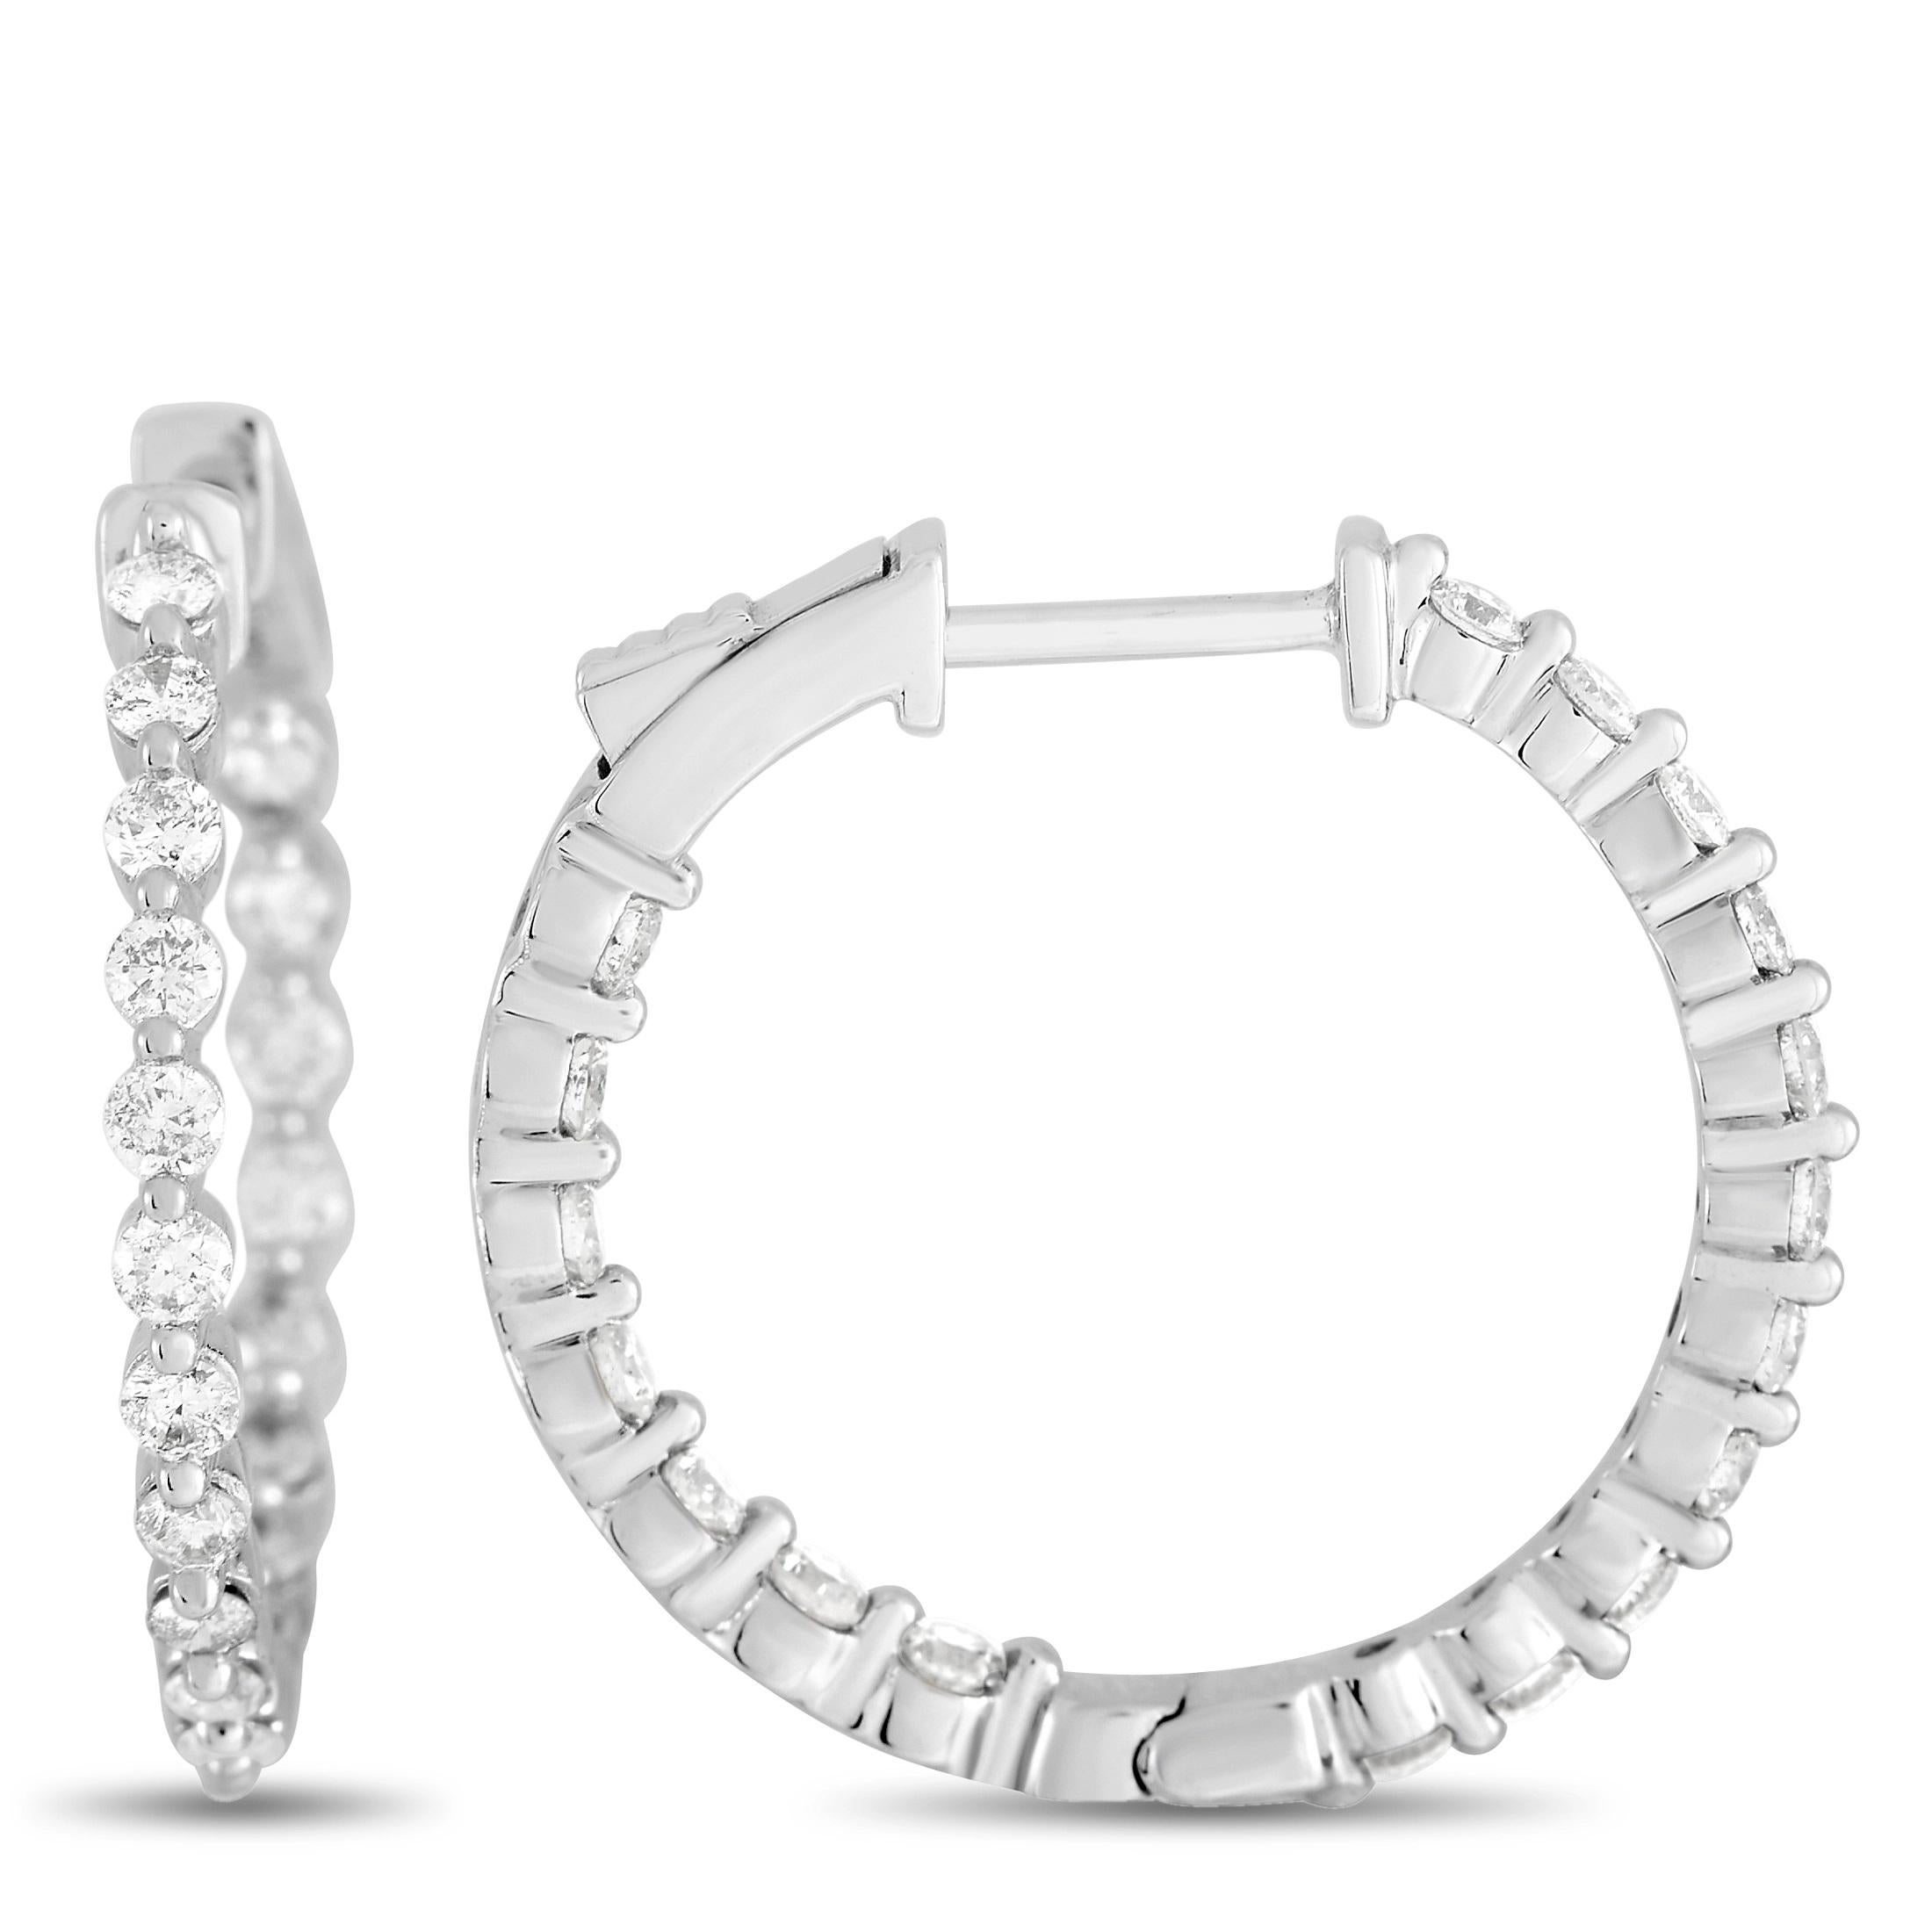 Nothing beats a classic pair of hoop earrings. Sleek and sophisticated, each one of these delicate earrings measures 0.88” round and comes complete with a 14K White Gold setting. Diamonds with a total weight of 1.0 carats ensure these always add a